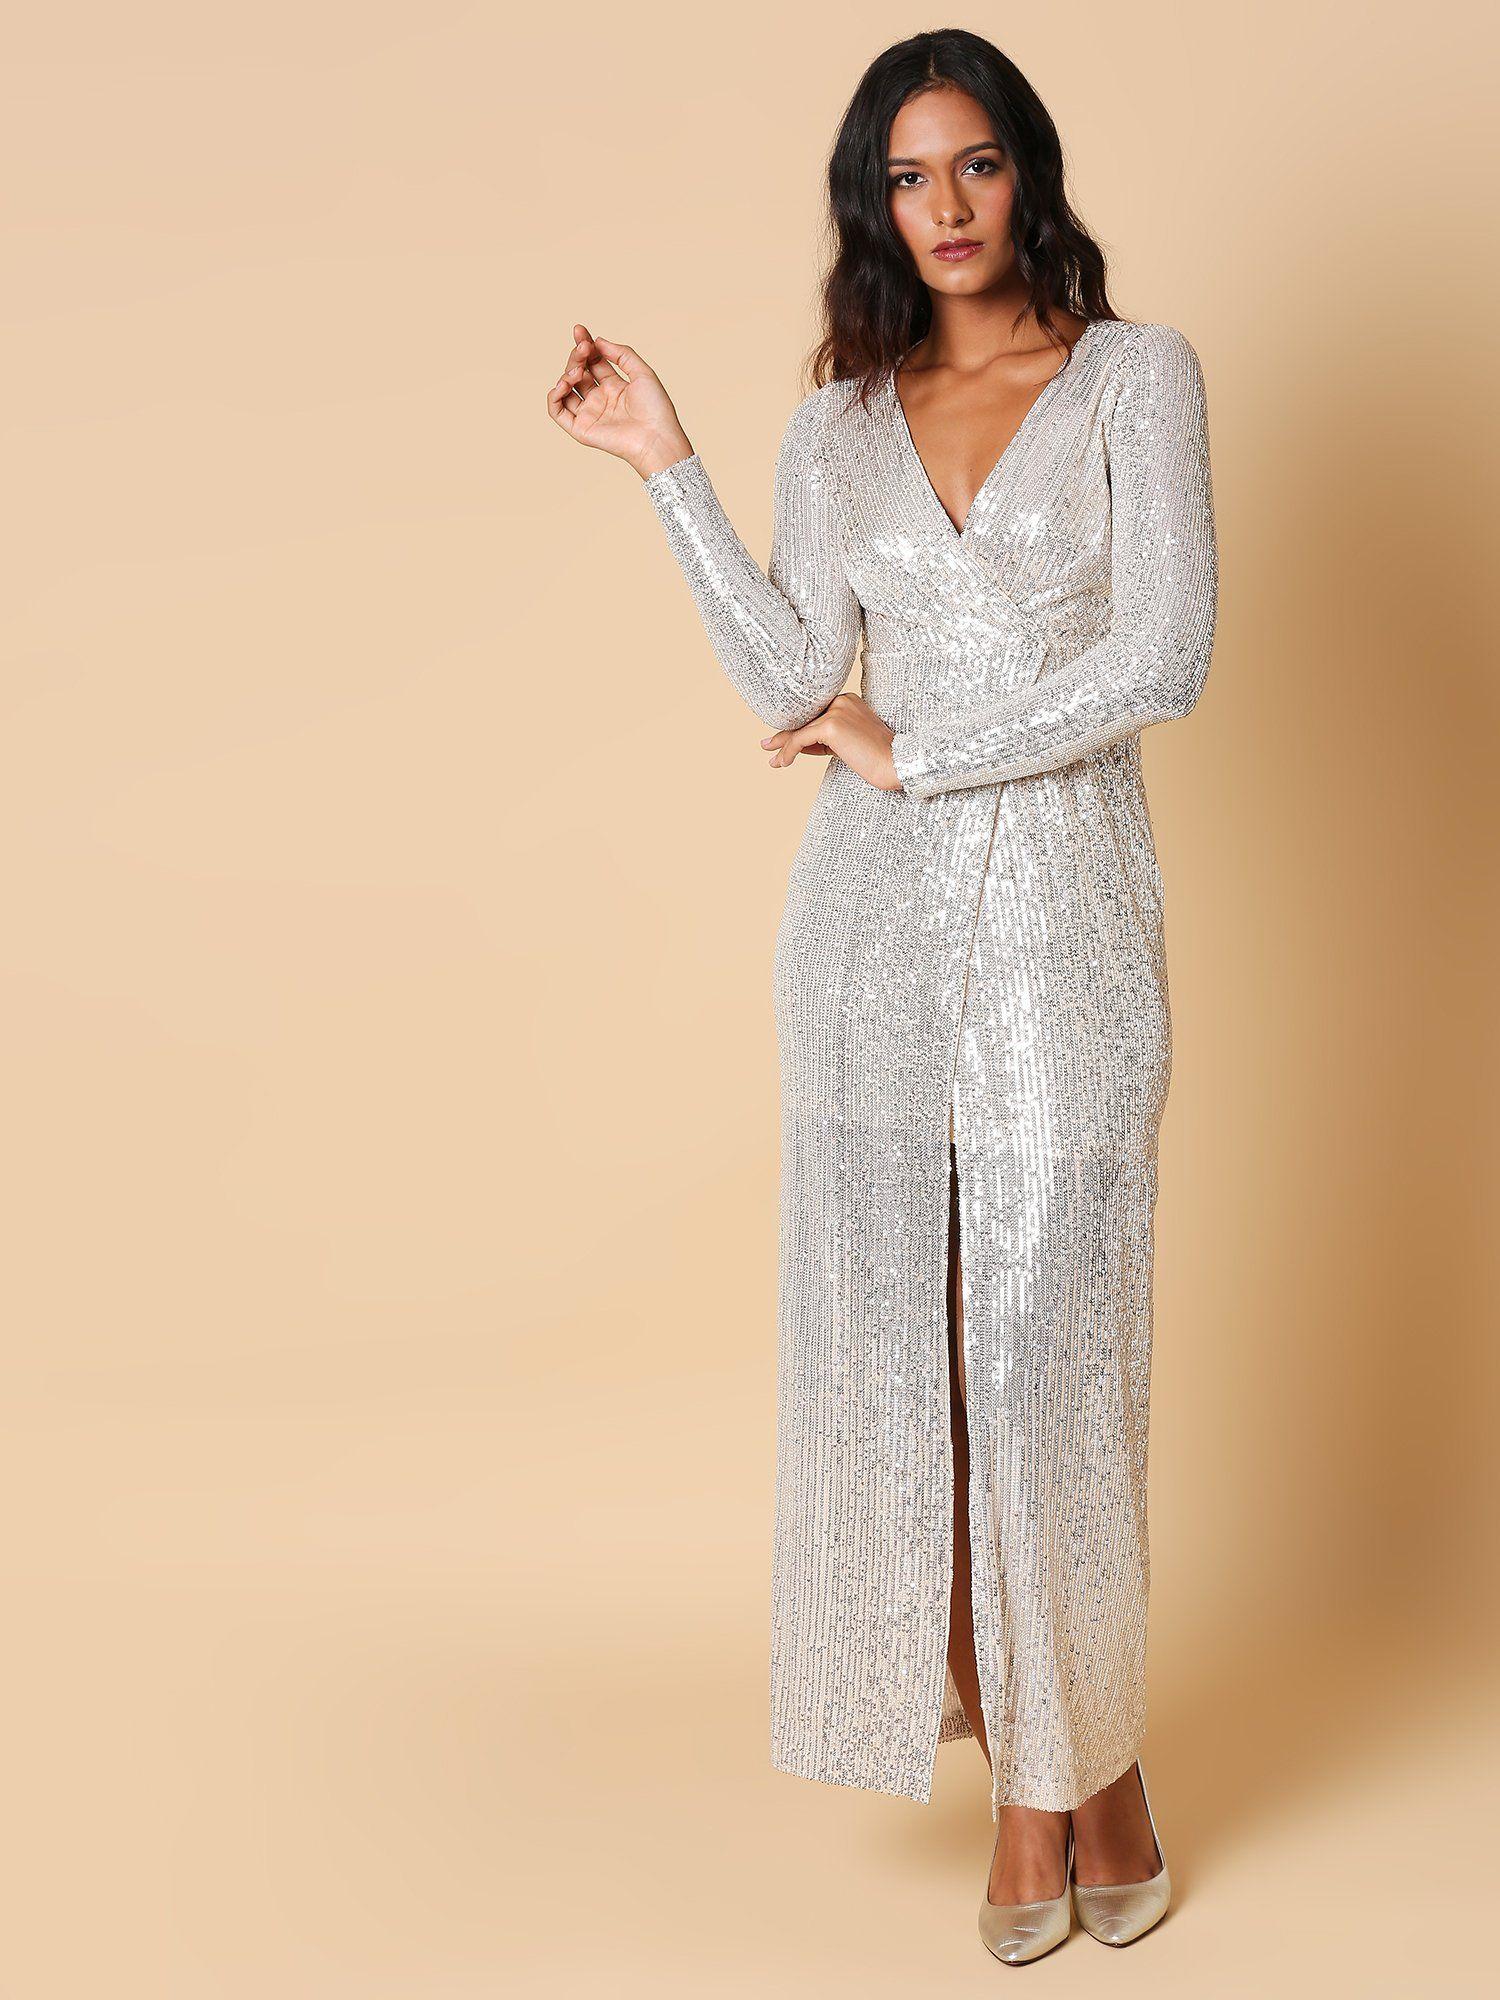 silver-come-and-get-me-sequin-maxi-dress